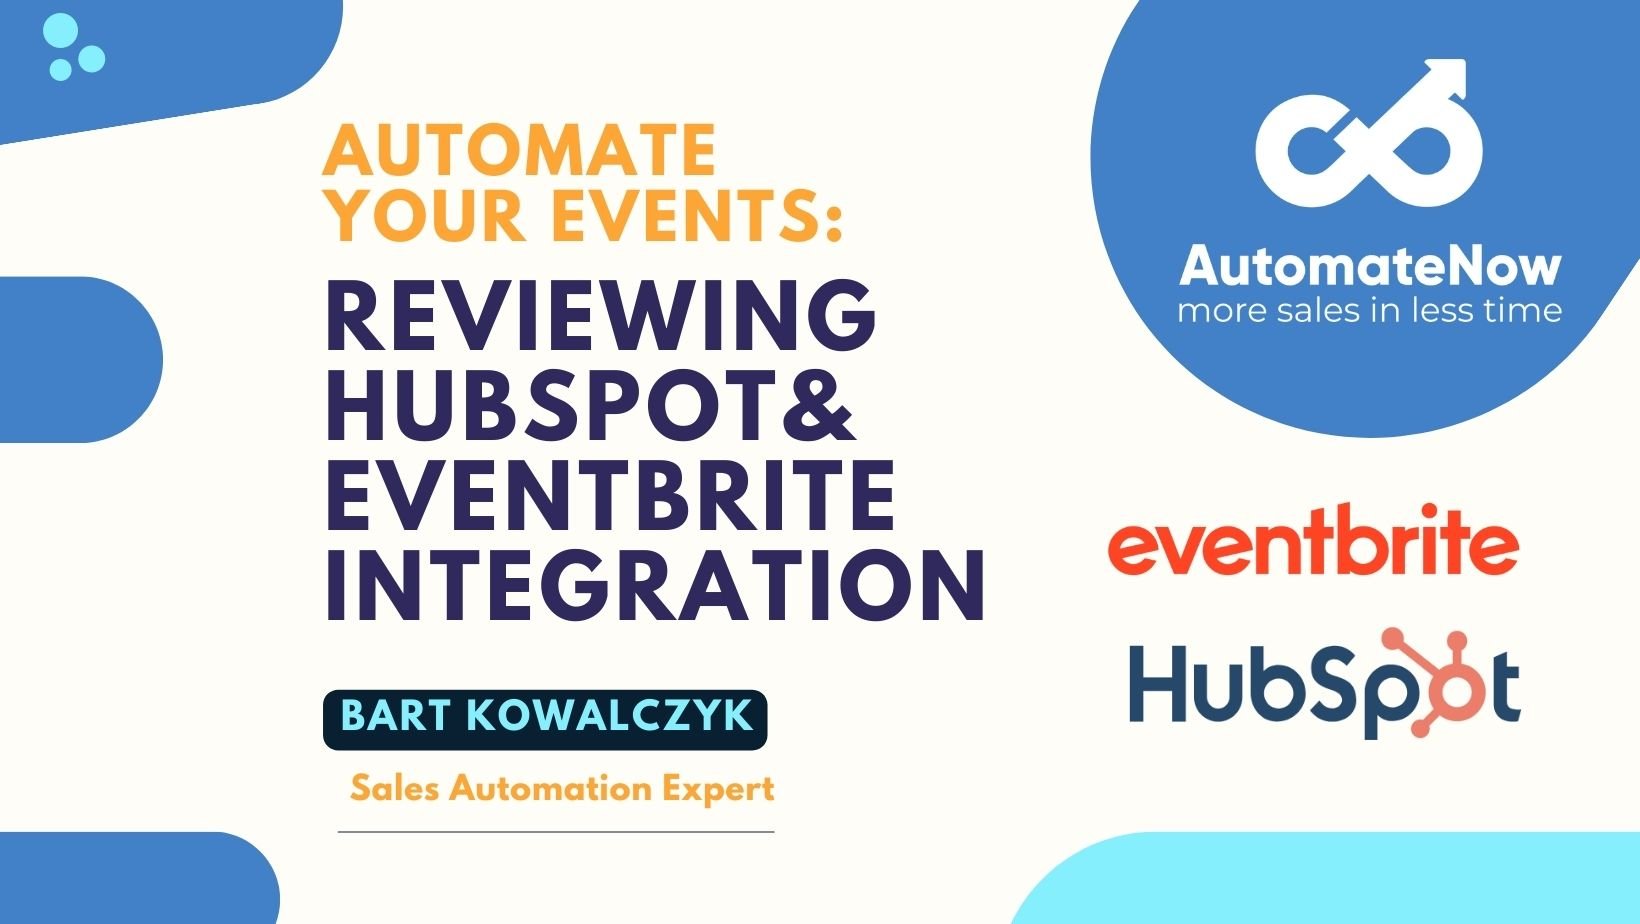 Automate your Events Reviewing HubSpot & Eventbrite Integration